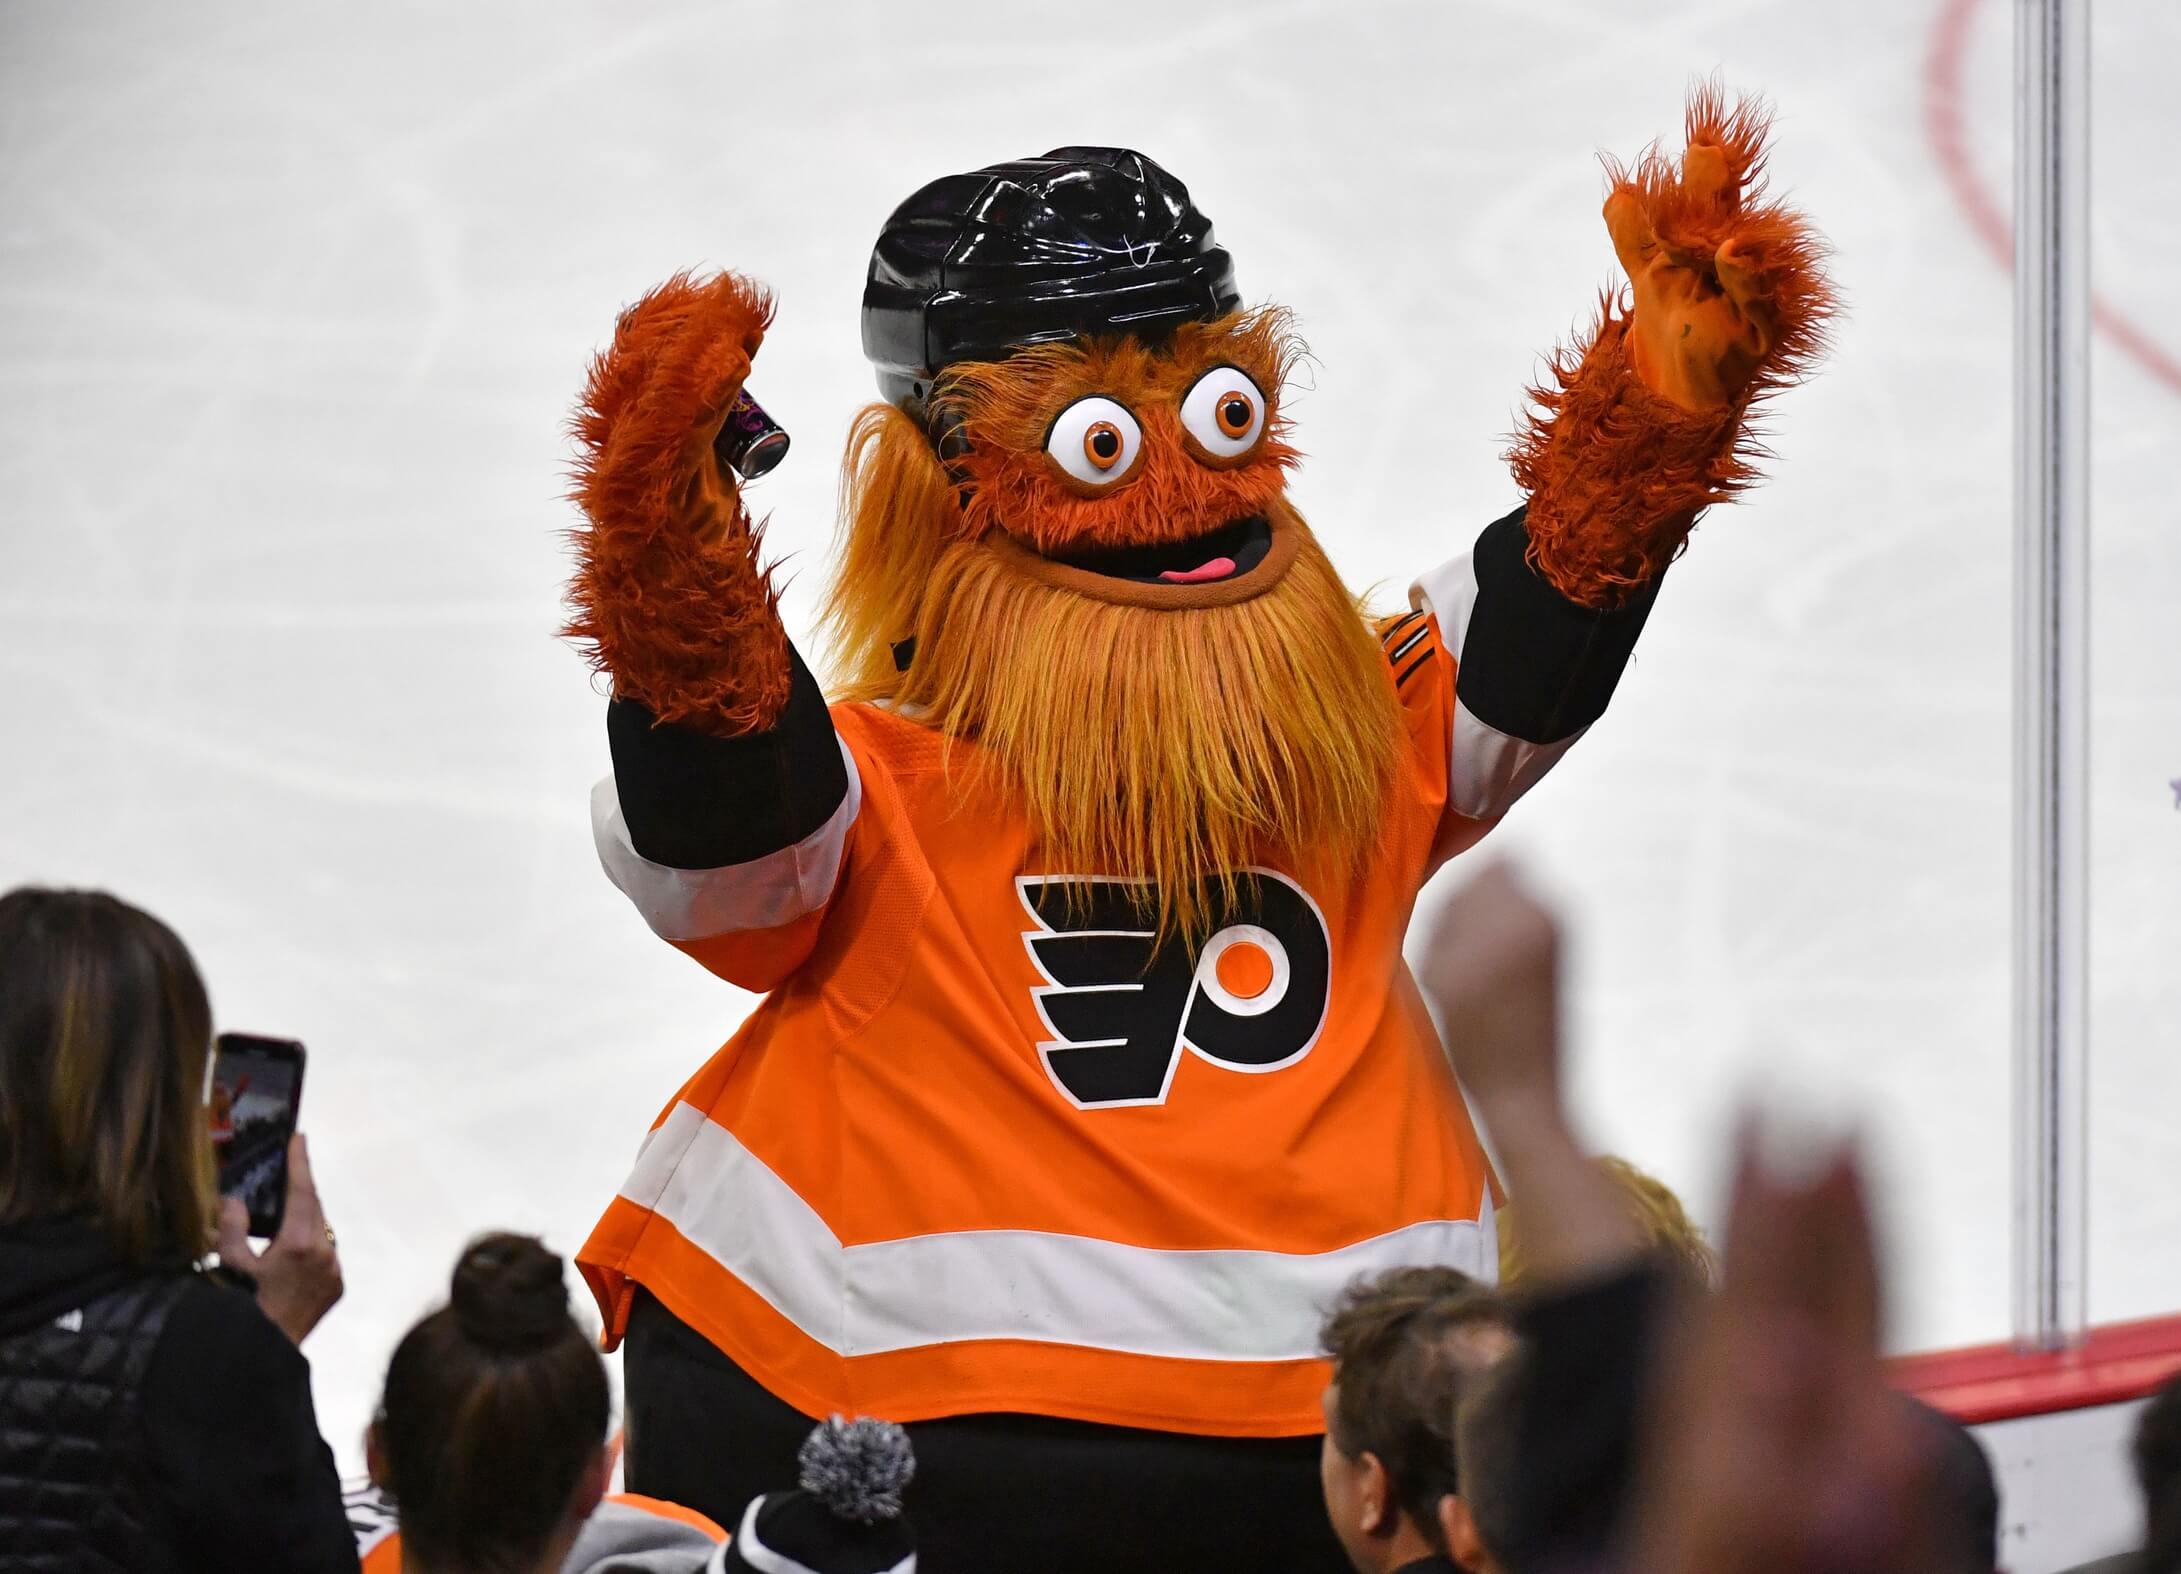 Imitation is the Sincerest Form of Flattery, Right Gritty